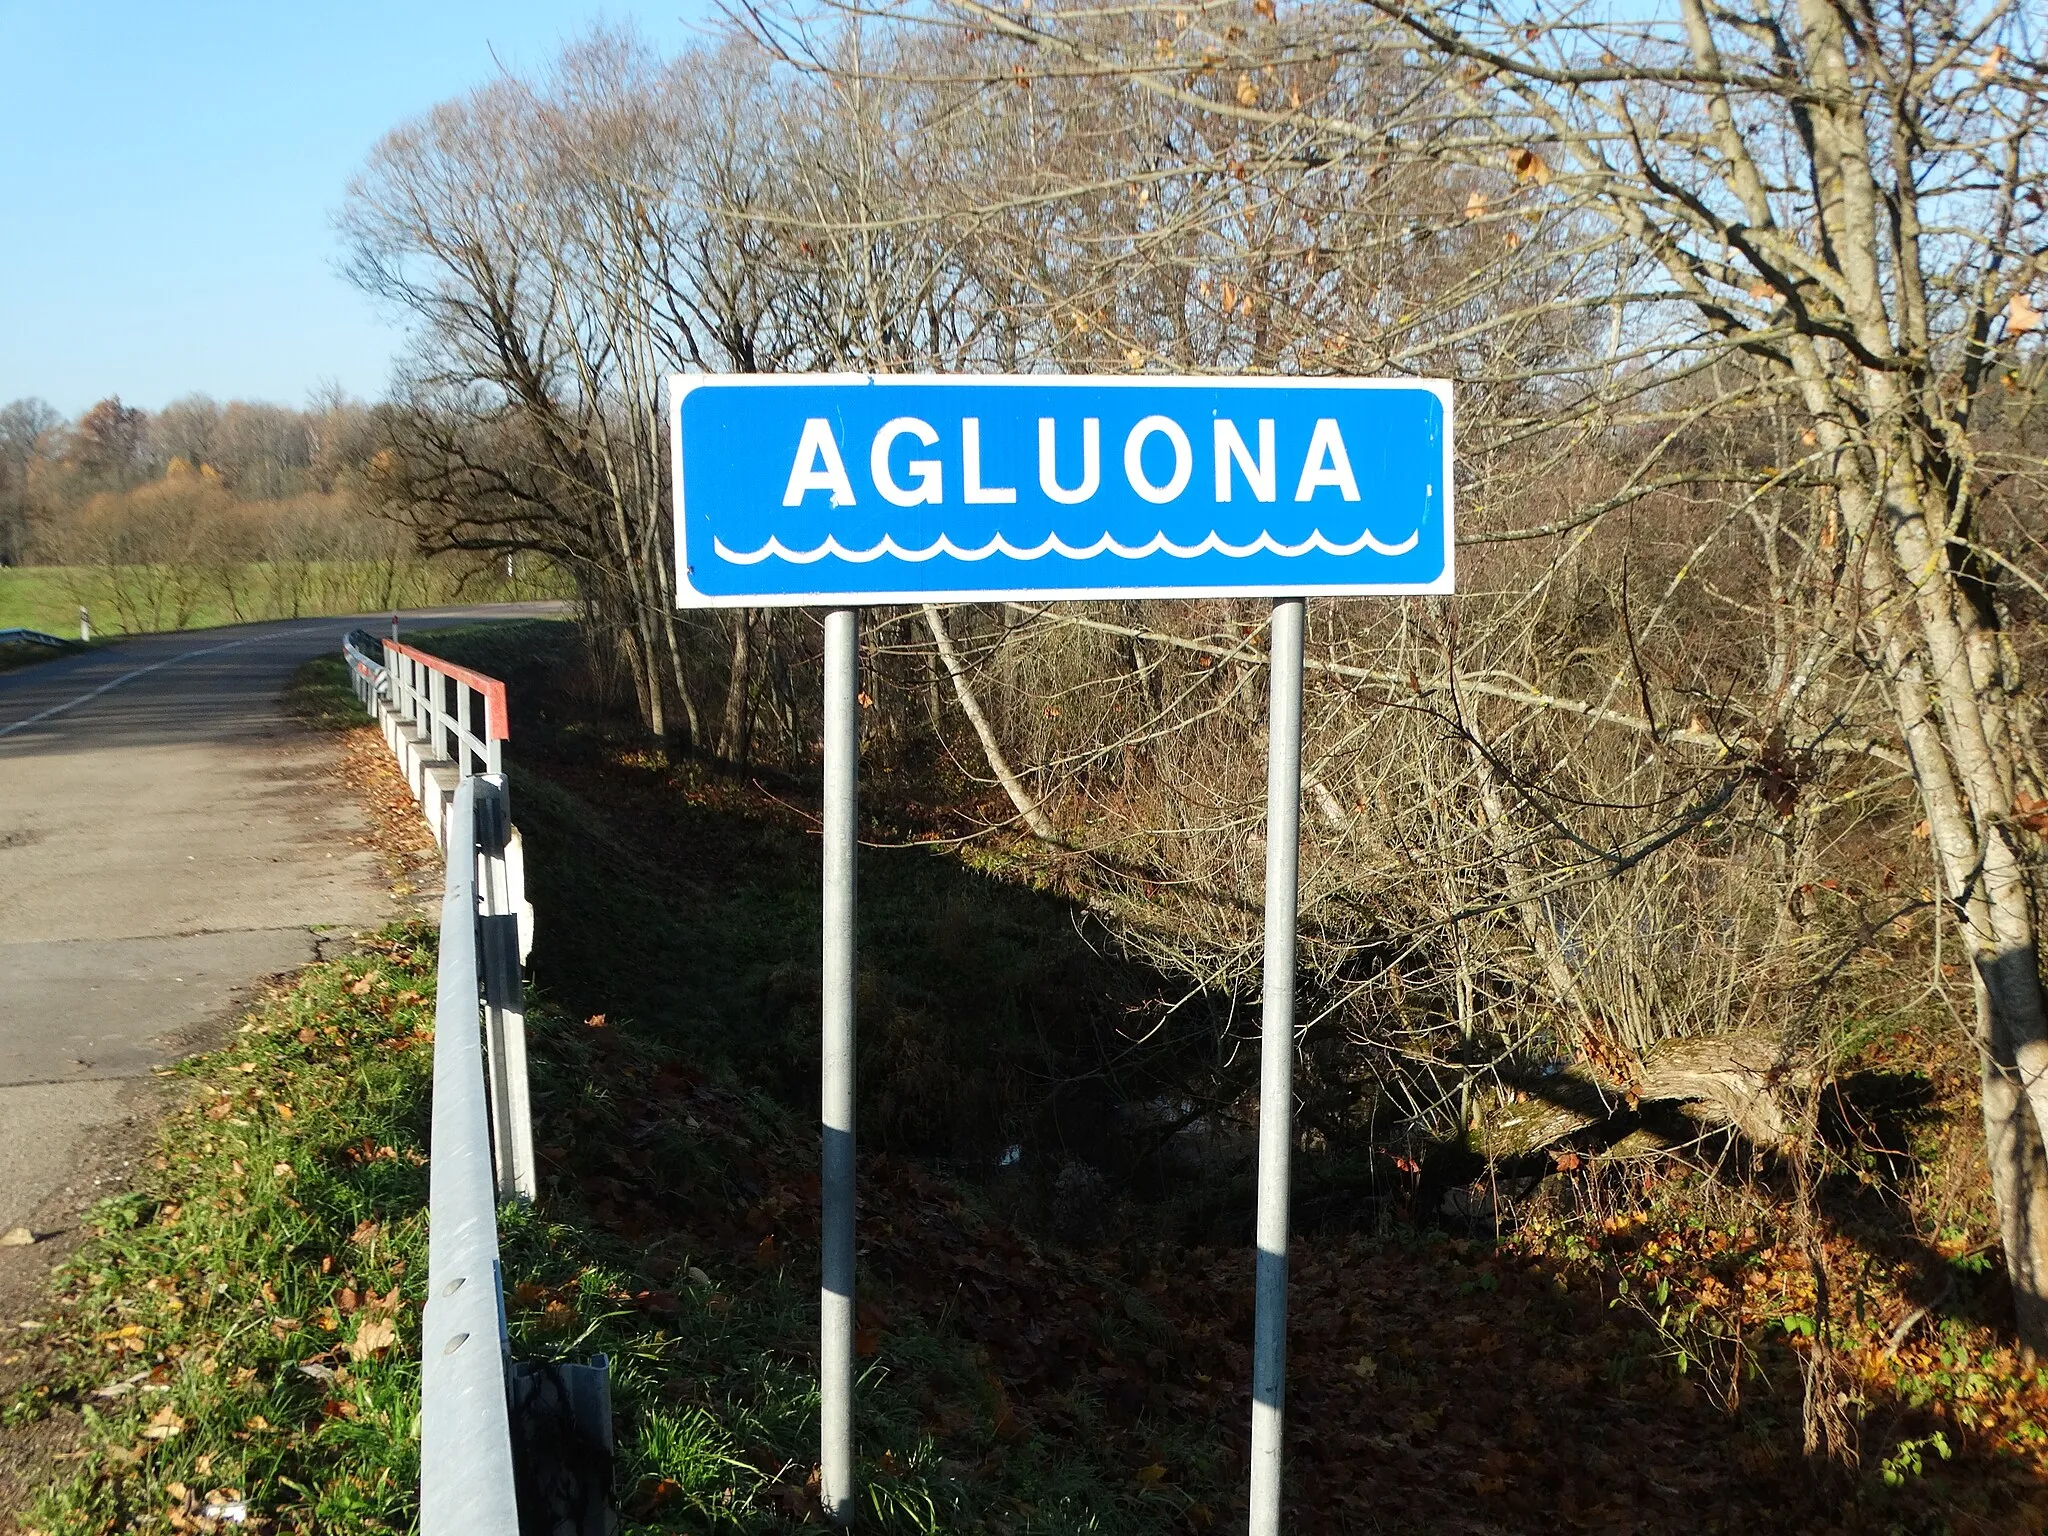 Photo showing: Agluona stream by Antegluonis, Tauragė district, Lithuania